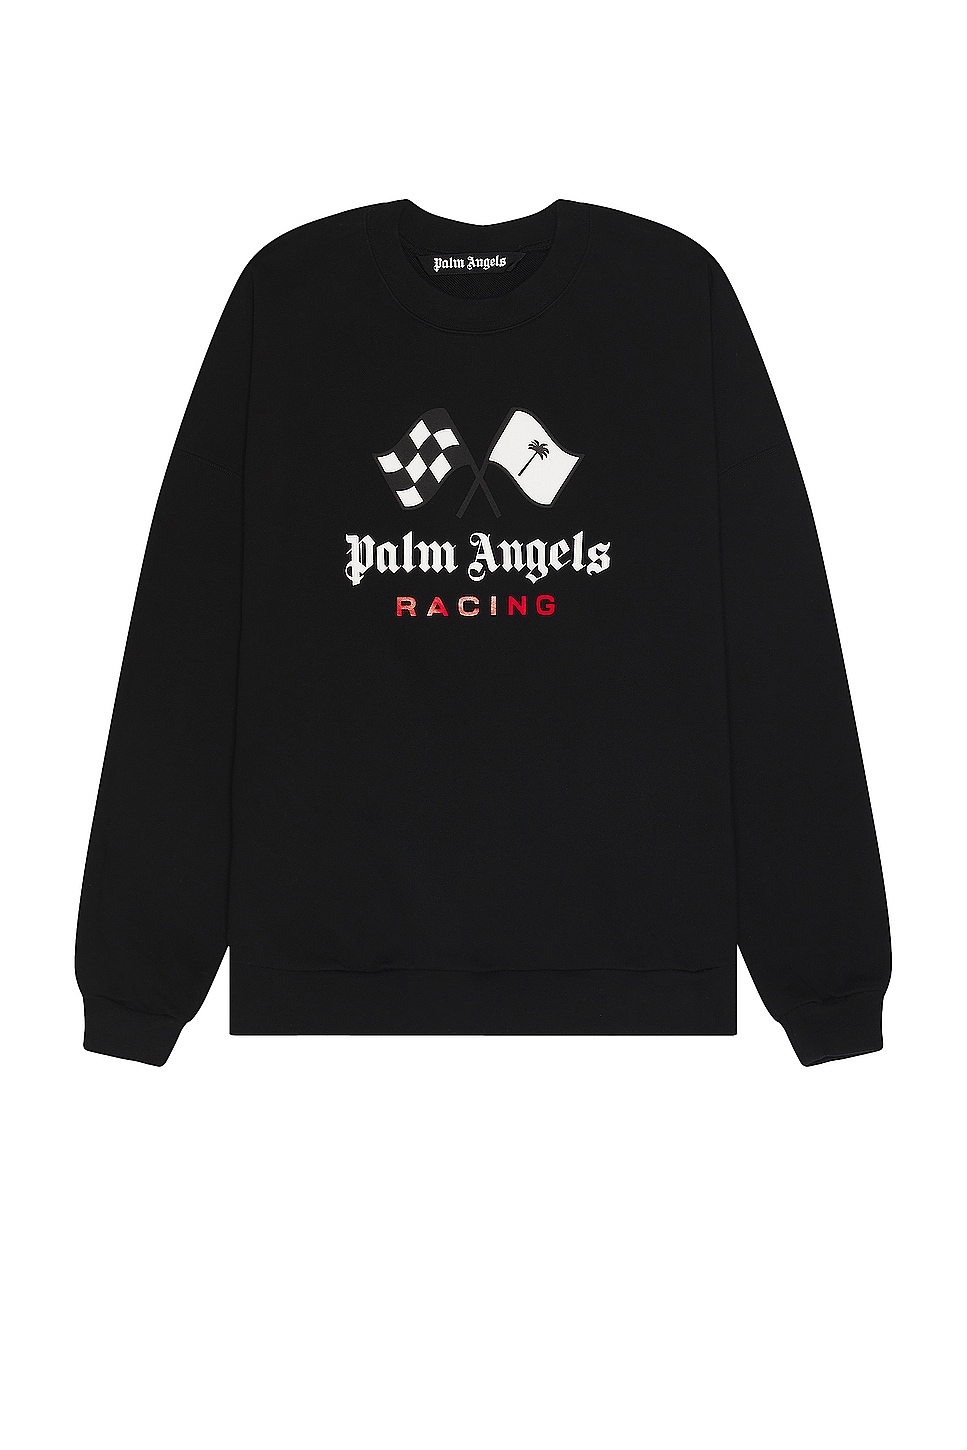 Image 1 of Palm Angels X Formula 1 Racing Sweater in Black, White, & Red